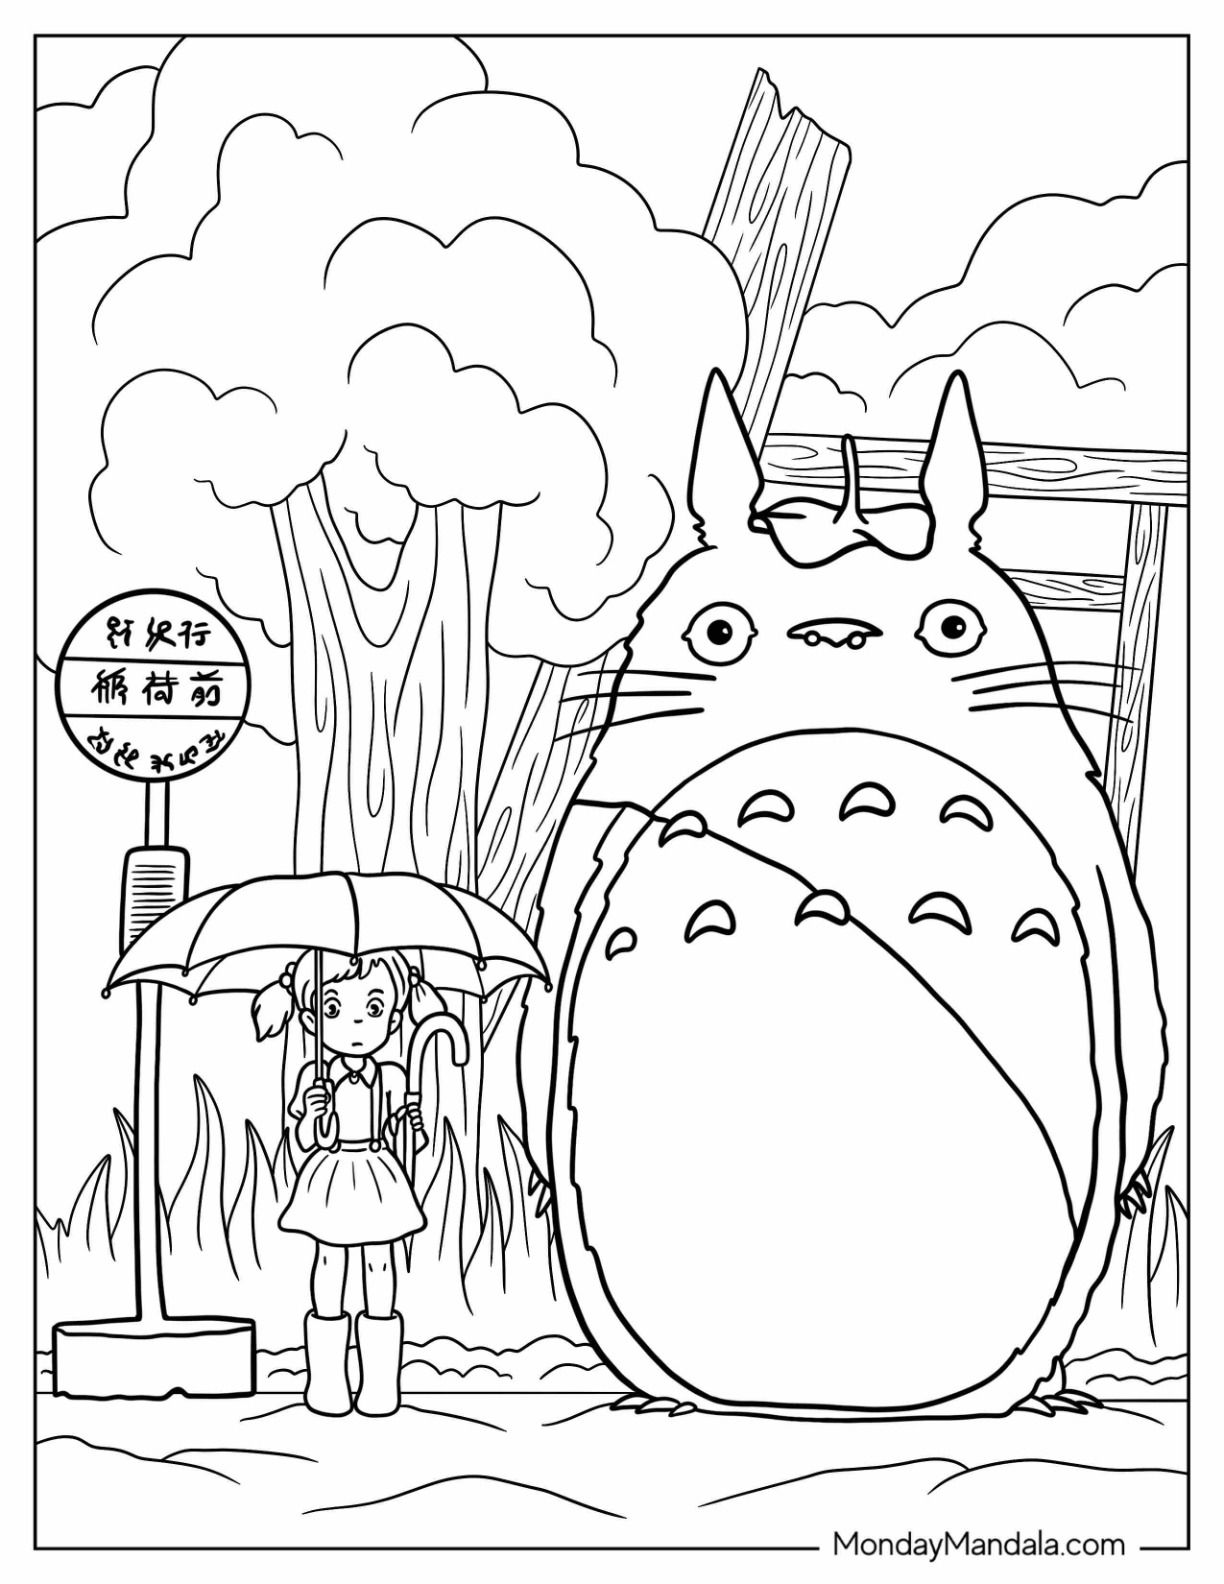 Studio ghibli coloring pages free pdf printables coloring book art cool coloring pages coloring pages